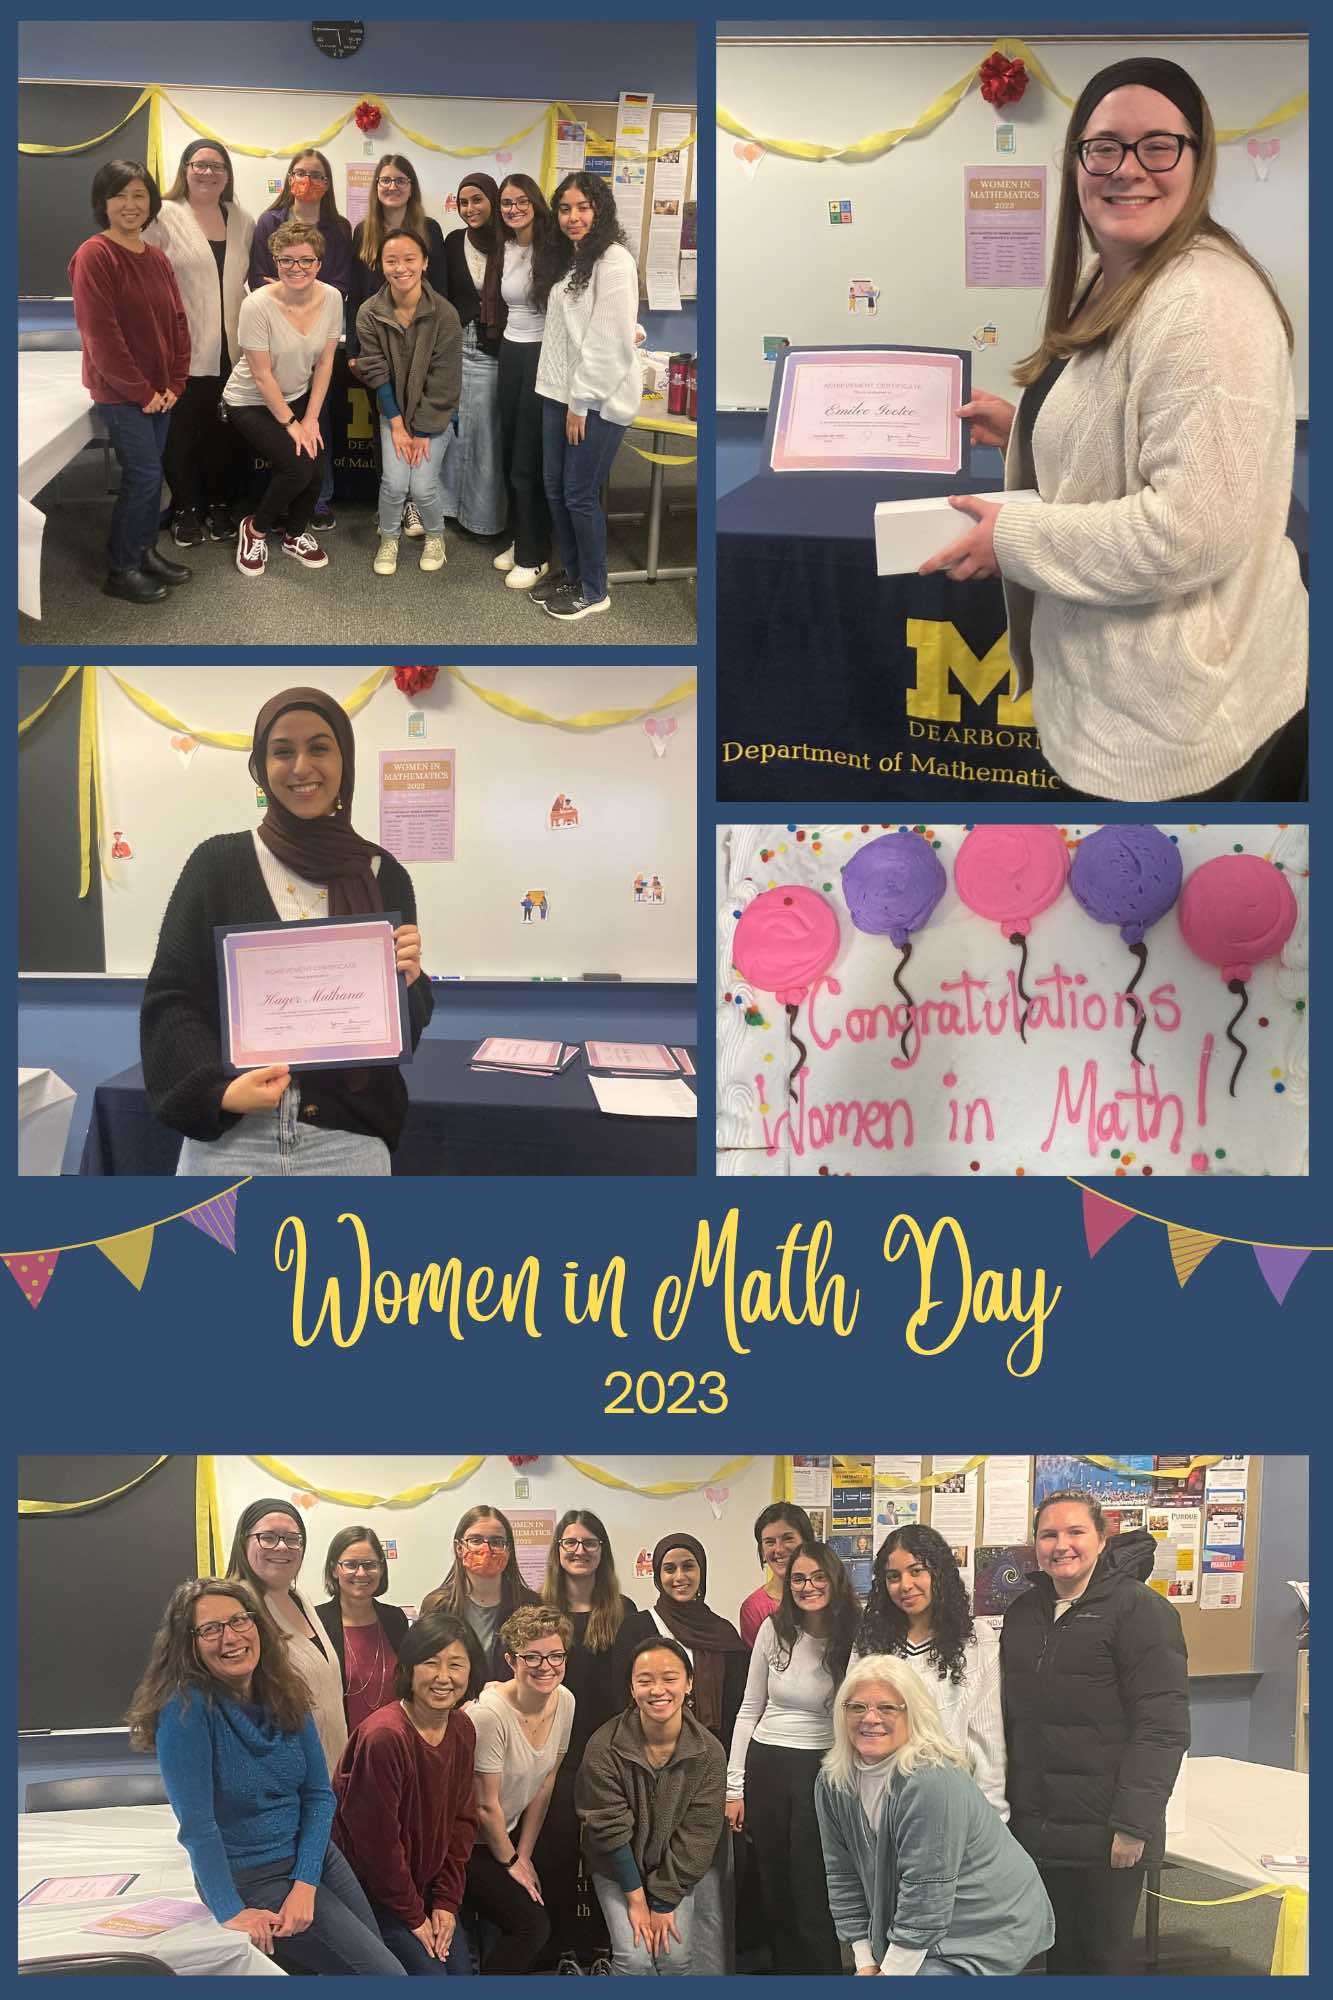 Women in Math Day 2023 collage